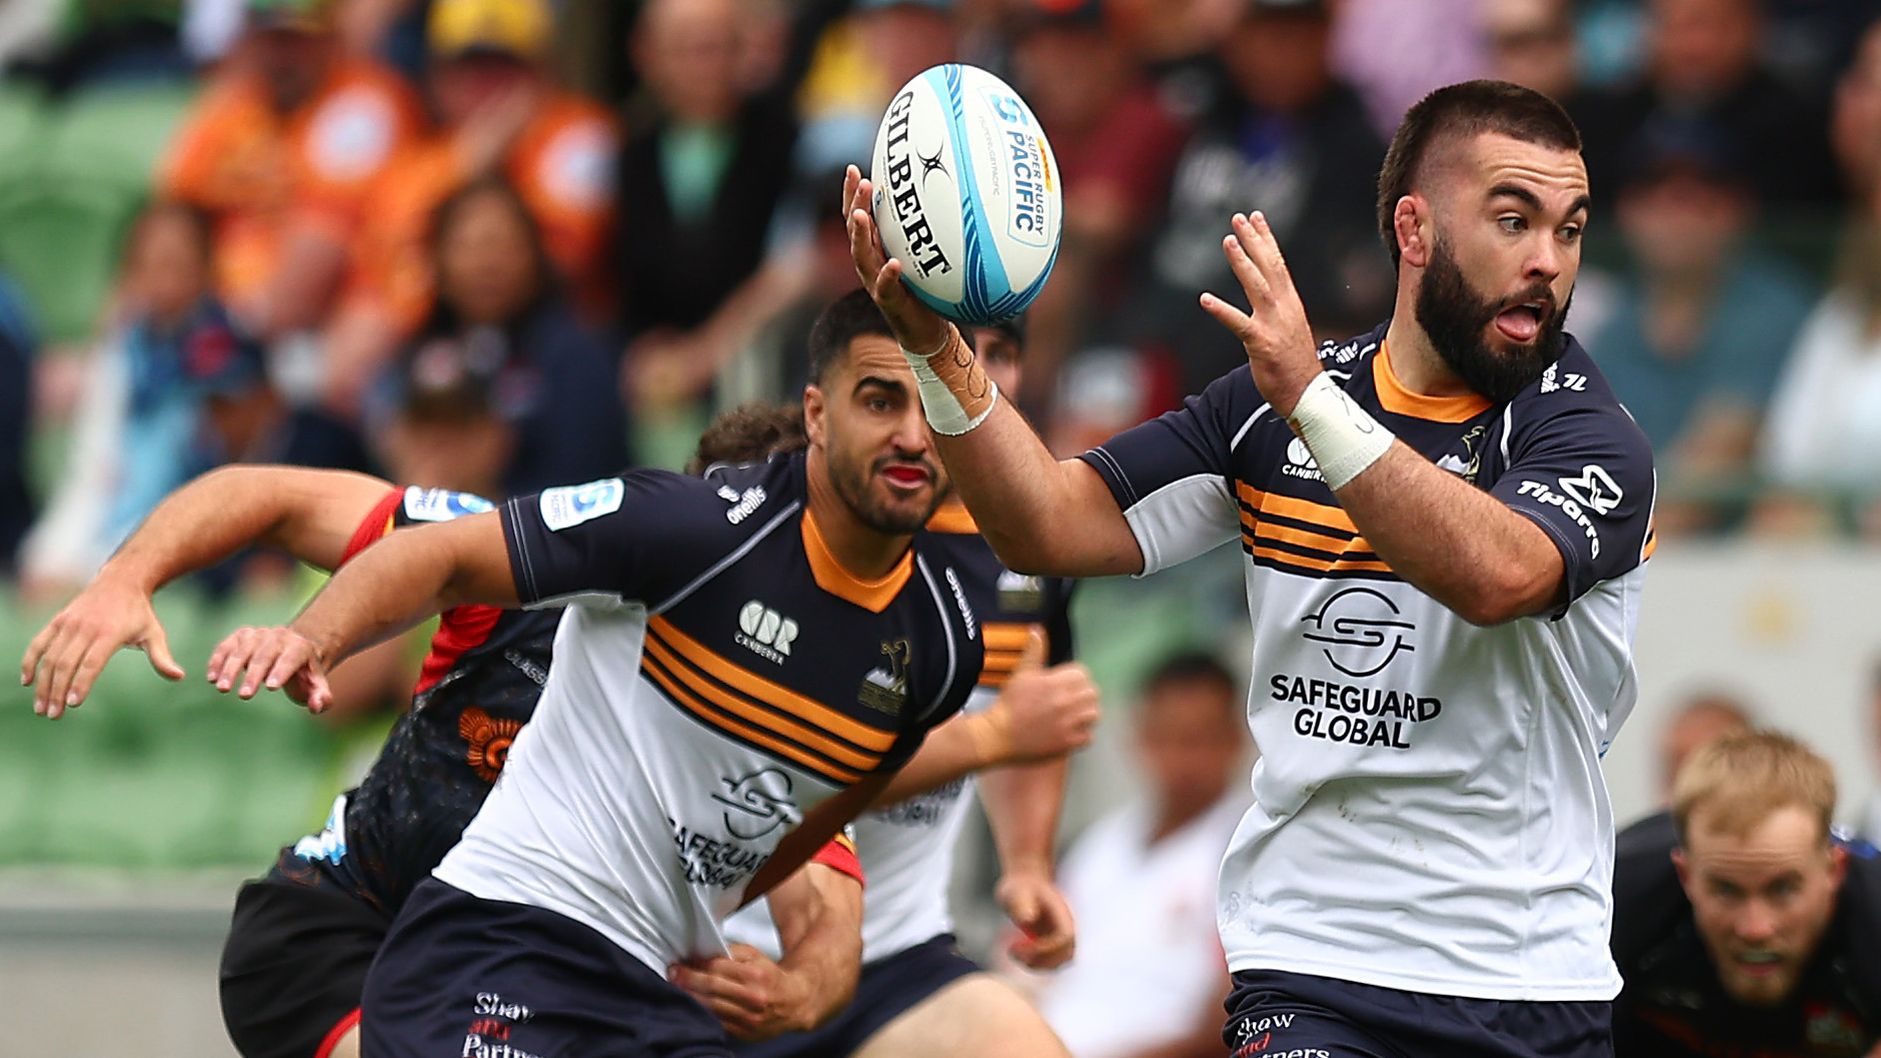 Luke Reimer of the Brumbies runs with the ball during the round two Super Rugby Pacific match.